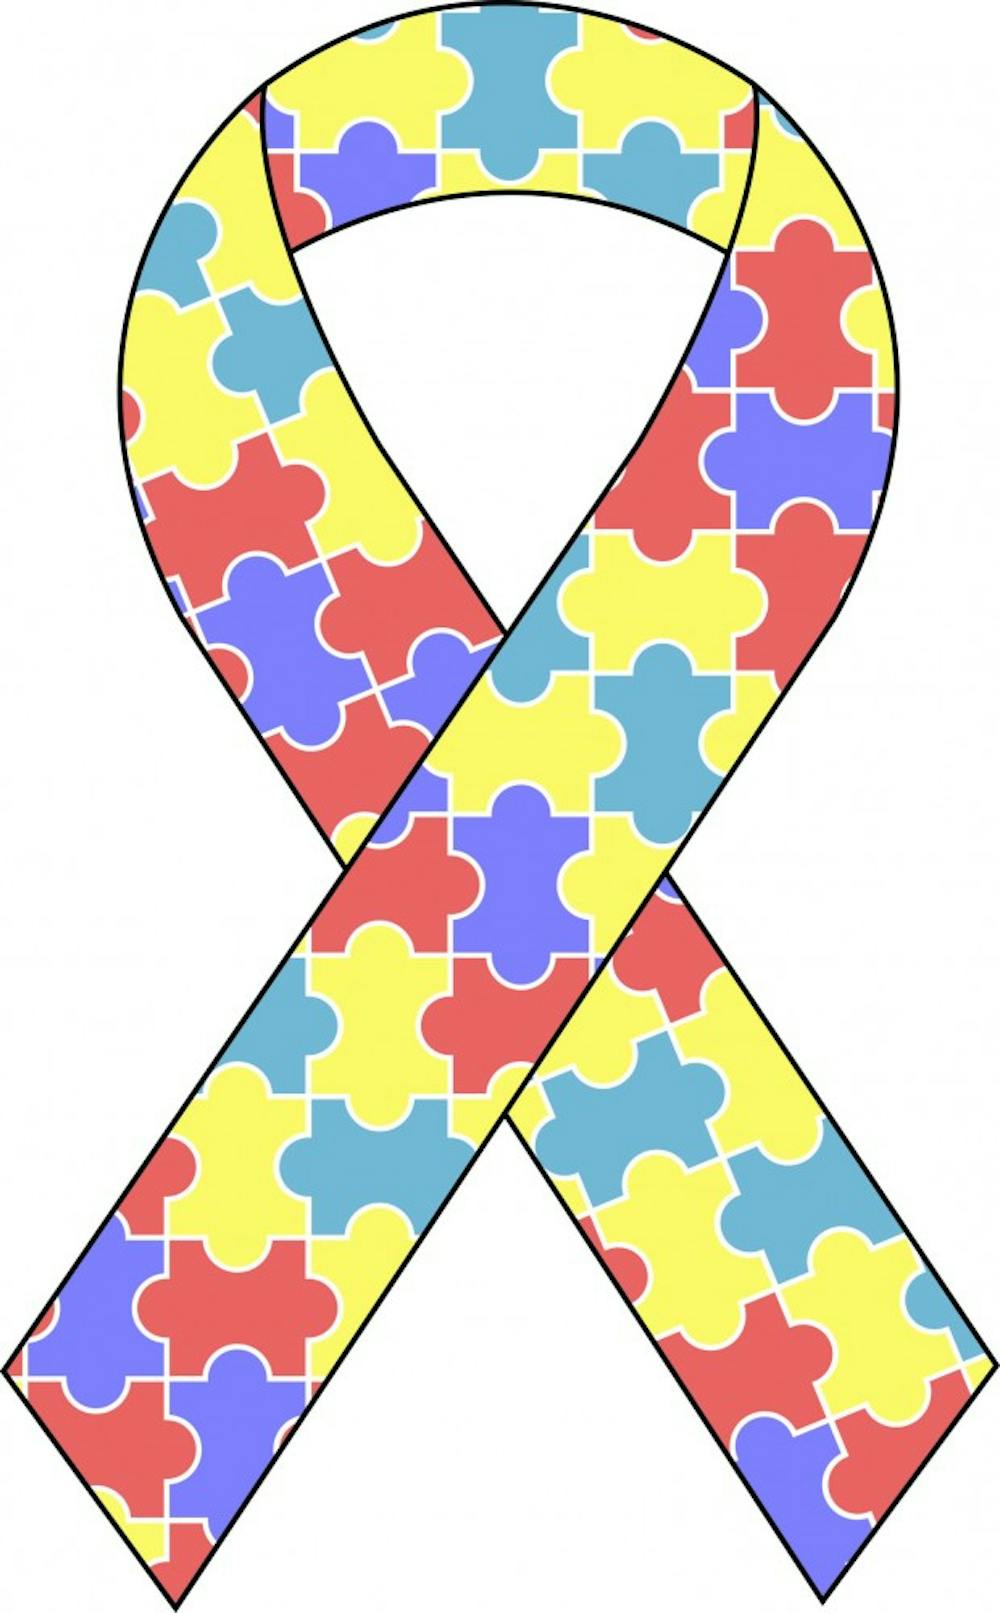 	According to the U.S. Centers for Disease Control and Prevention, one in 88 children is diagnosed with autism spectrum disorder.